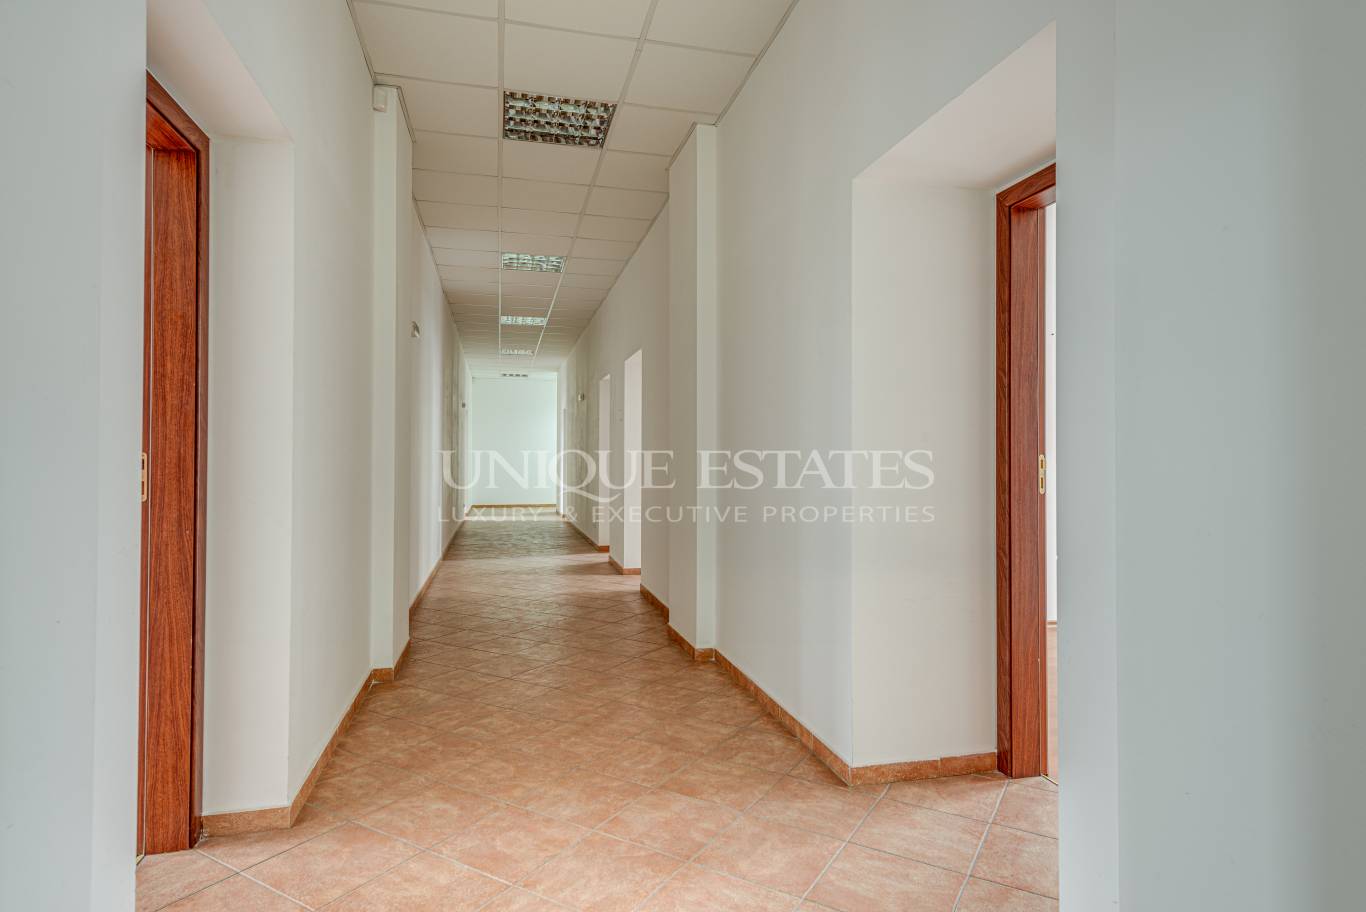 Office for rent in Sofia, Downtown with listing ID: K4831 - image 7